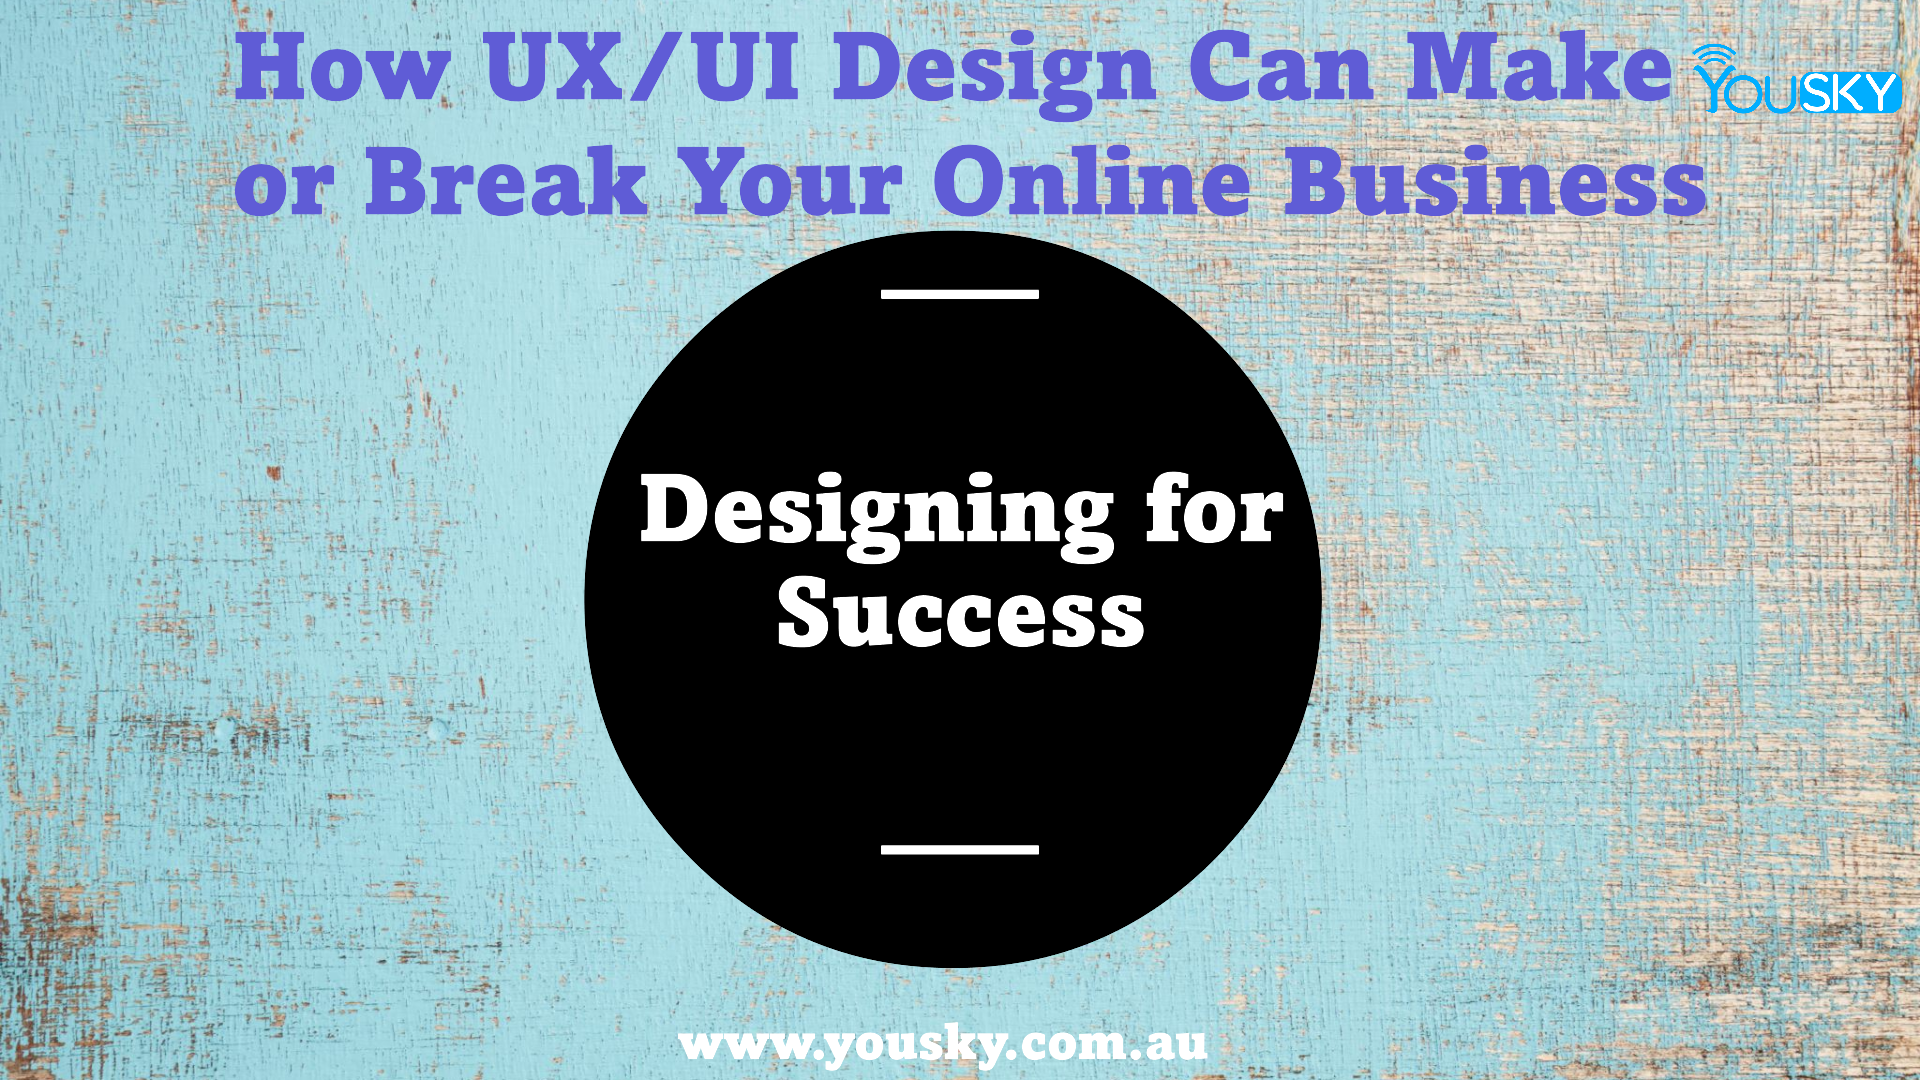 How UX/UI Design Can Make or Break Your Online Business